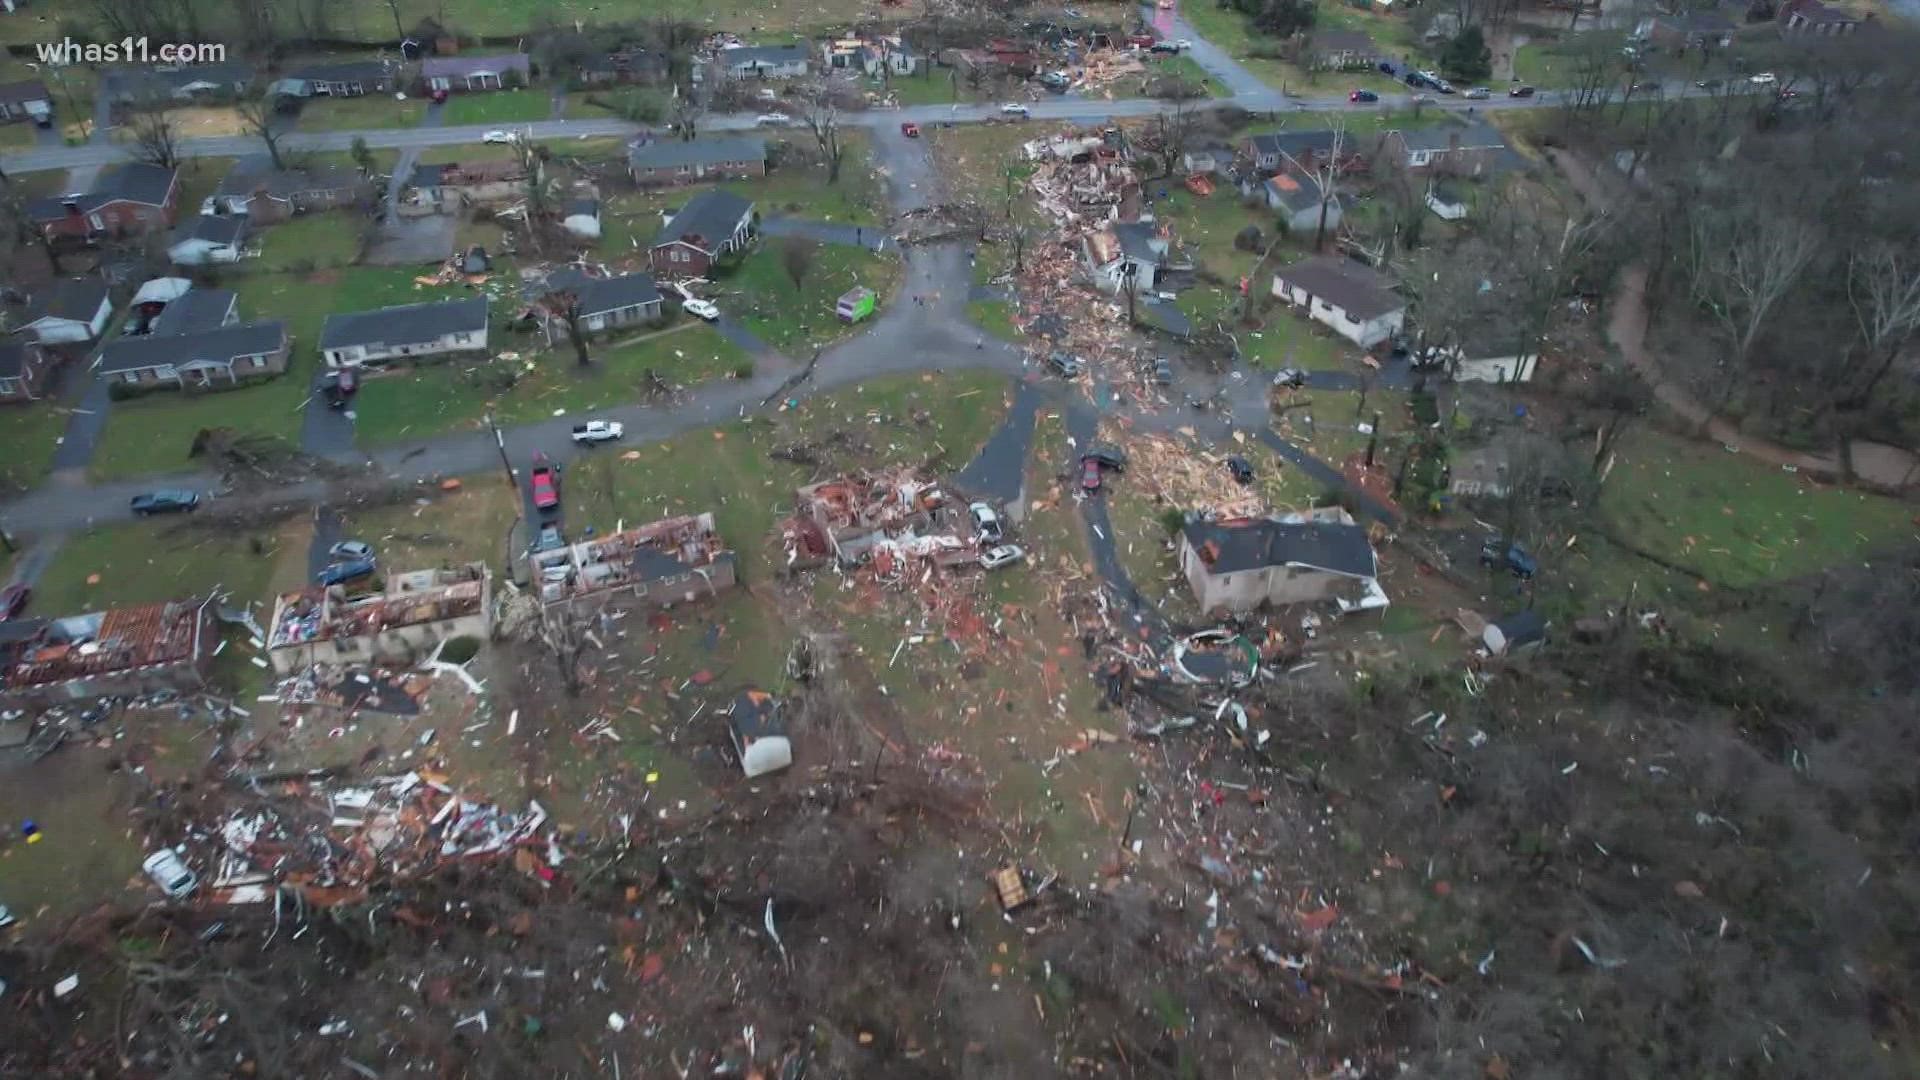 A look at damage in Bowling Green, Kentucky after a strong storm and suspected tornado ripped through the town.